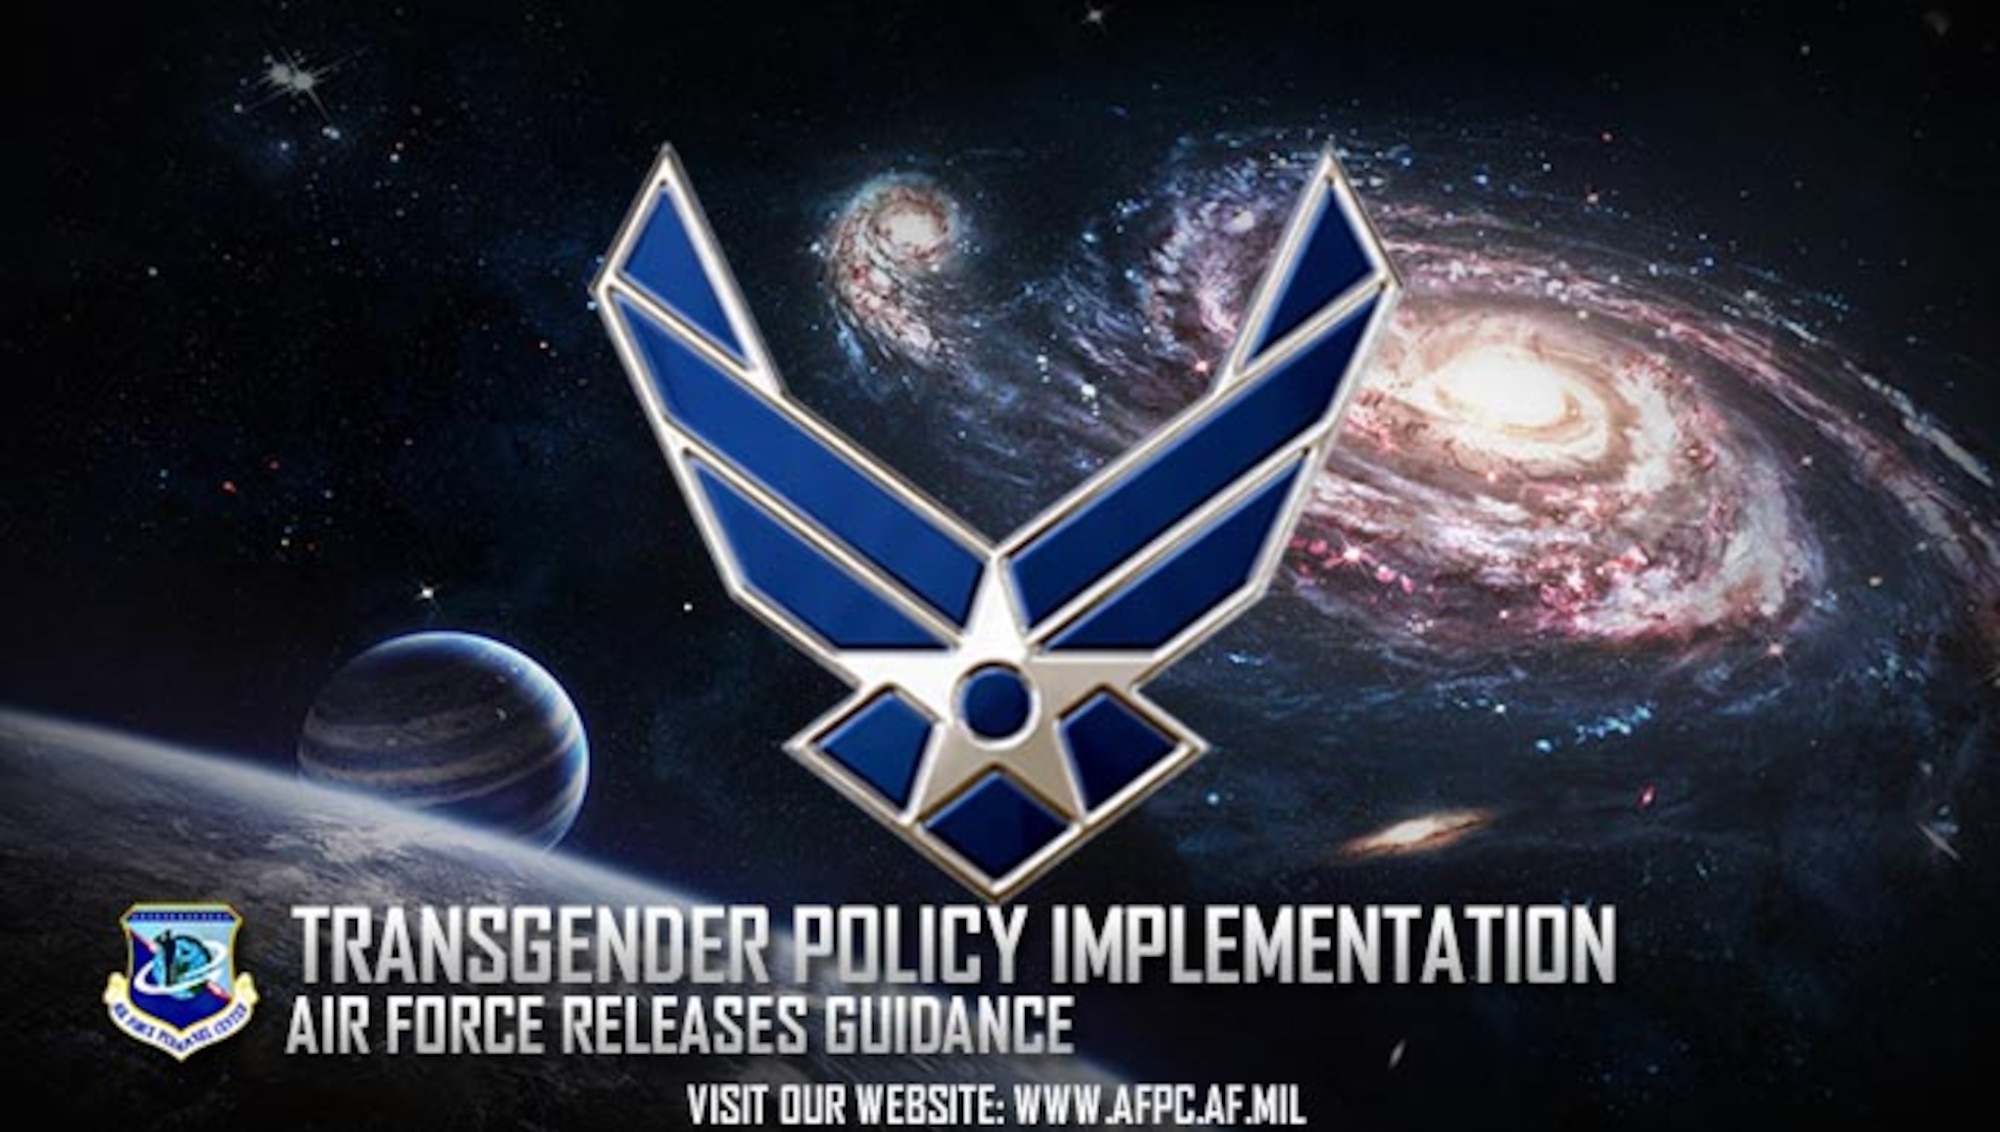 Defense Secretary Ash Carter announced in June that transgender individuals will now be able to openly serve in the U.S. armed forces. The Air Force’s implementation guidance addresses the specific procedures to support the new policy. (U.S. Air Force graphic by Kat Bailey)